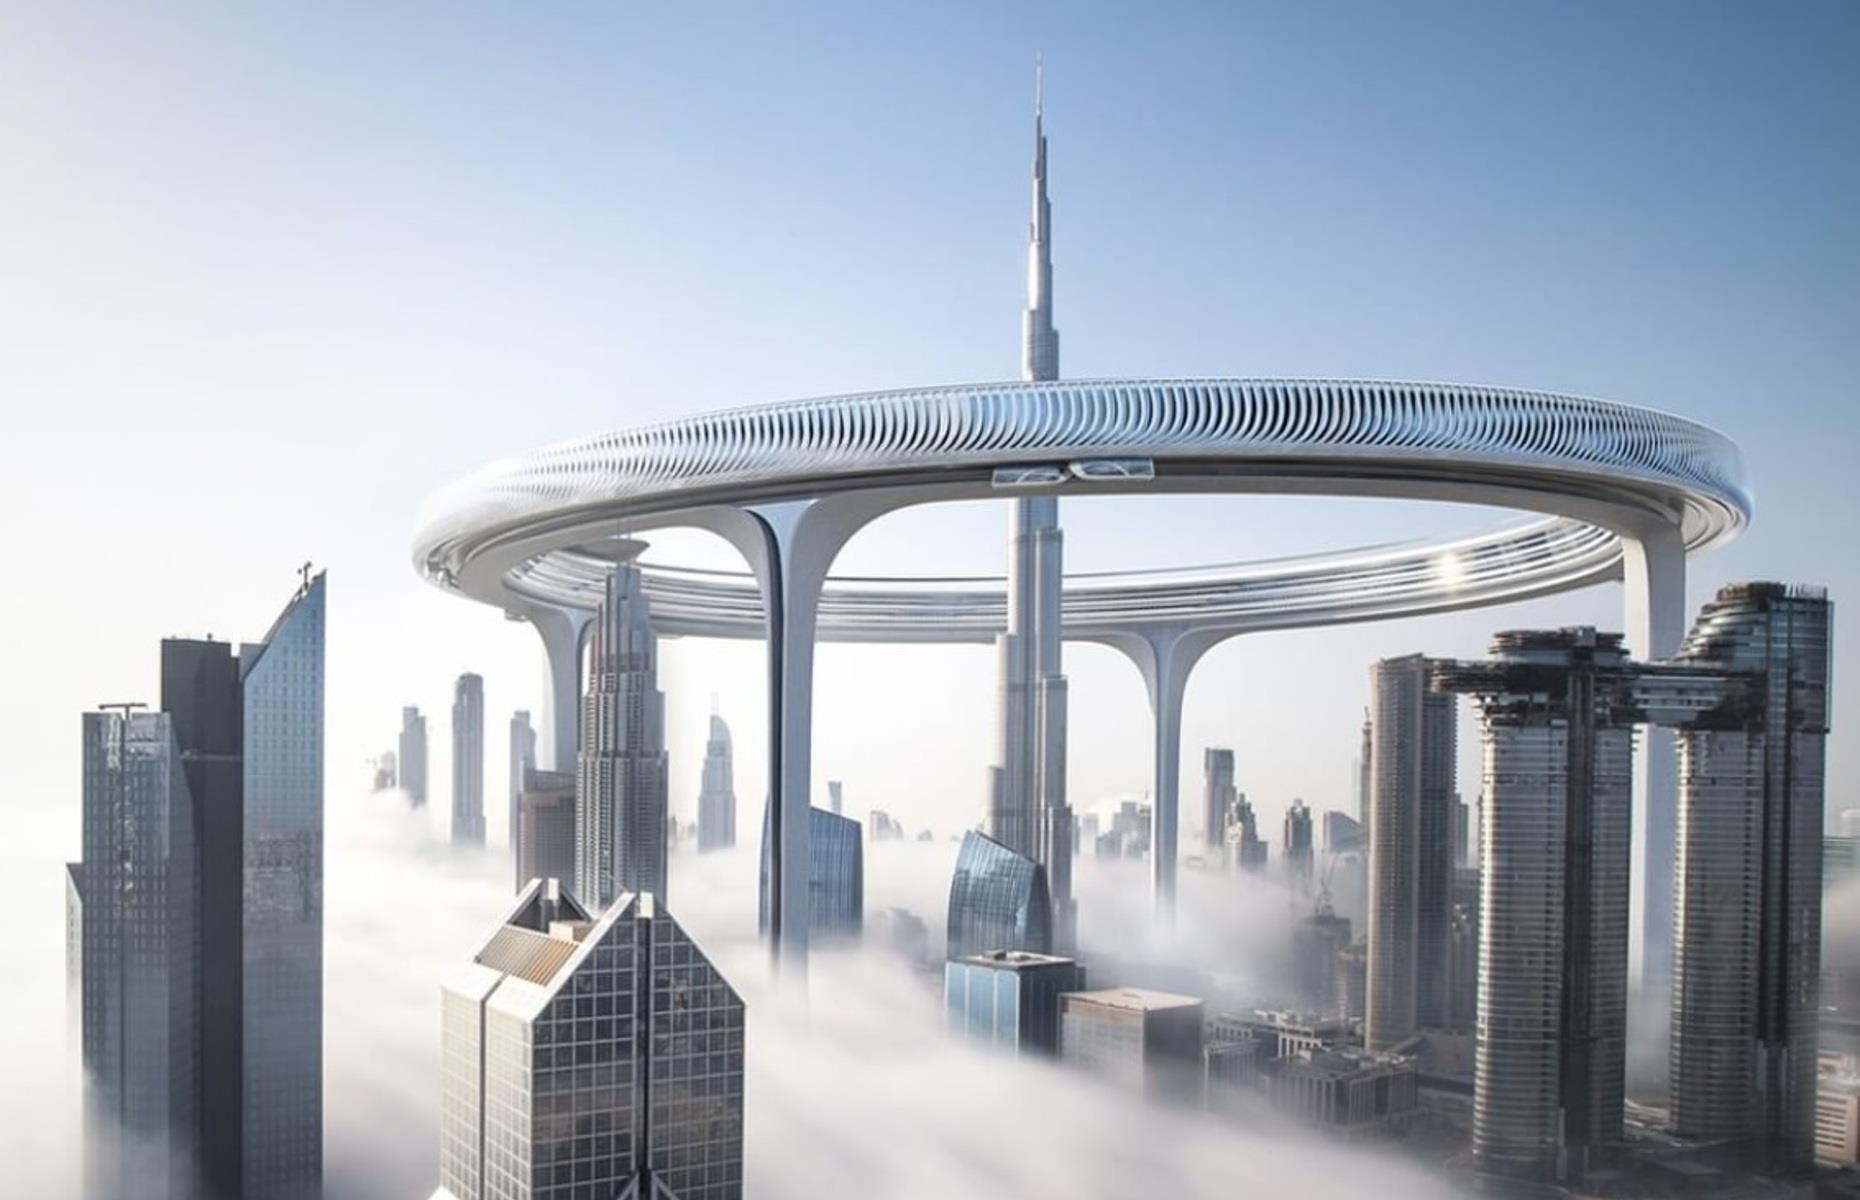 <p>Dubai’s Burj Khalifa is the world’s tallest building at 2,723 feet (830m), but it could become even more spectacular if these plans by architecture firm ZNera Space ever come to fruition. They’ve designed a space-age ring to encircle the famous landmark, which would stand supported by five pillars 1,804 feet (550m) above street level and extend across an area more than 1.8 miles (3km) wide.</p>